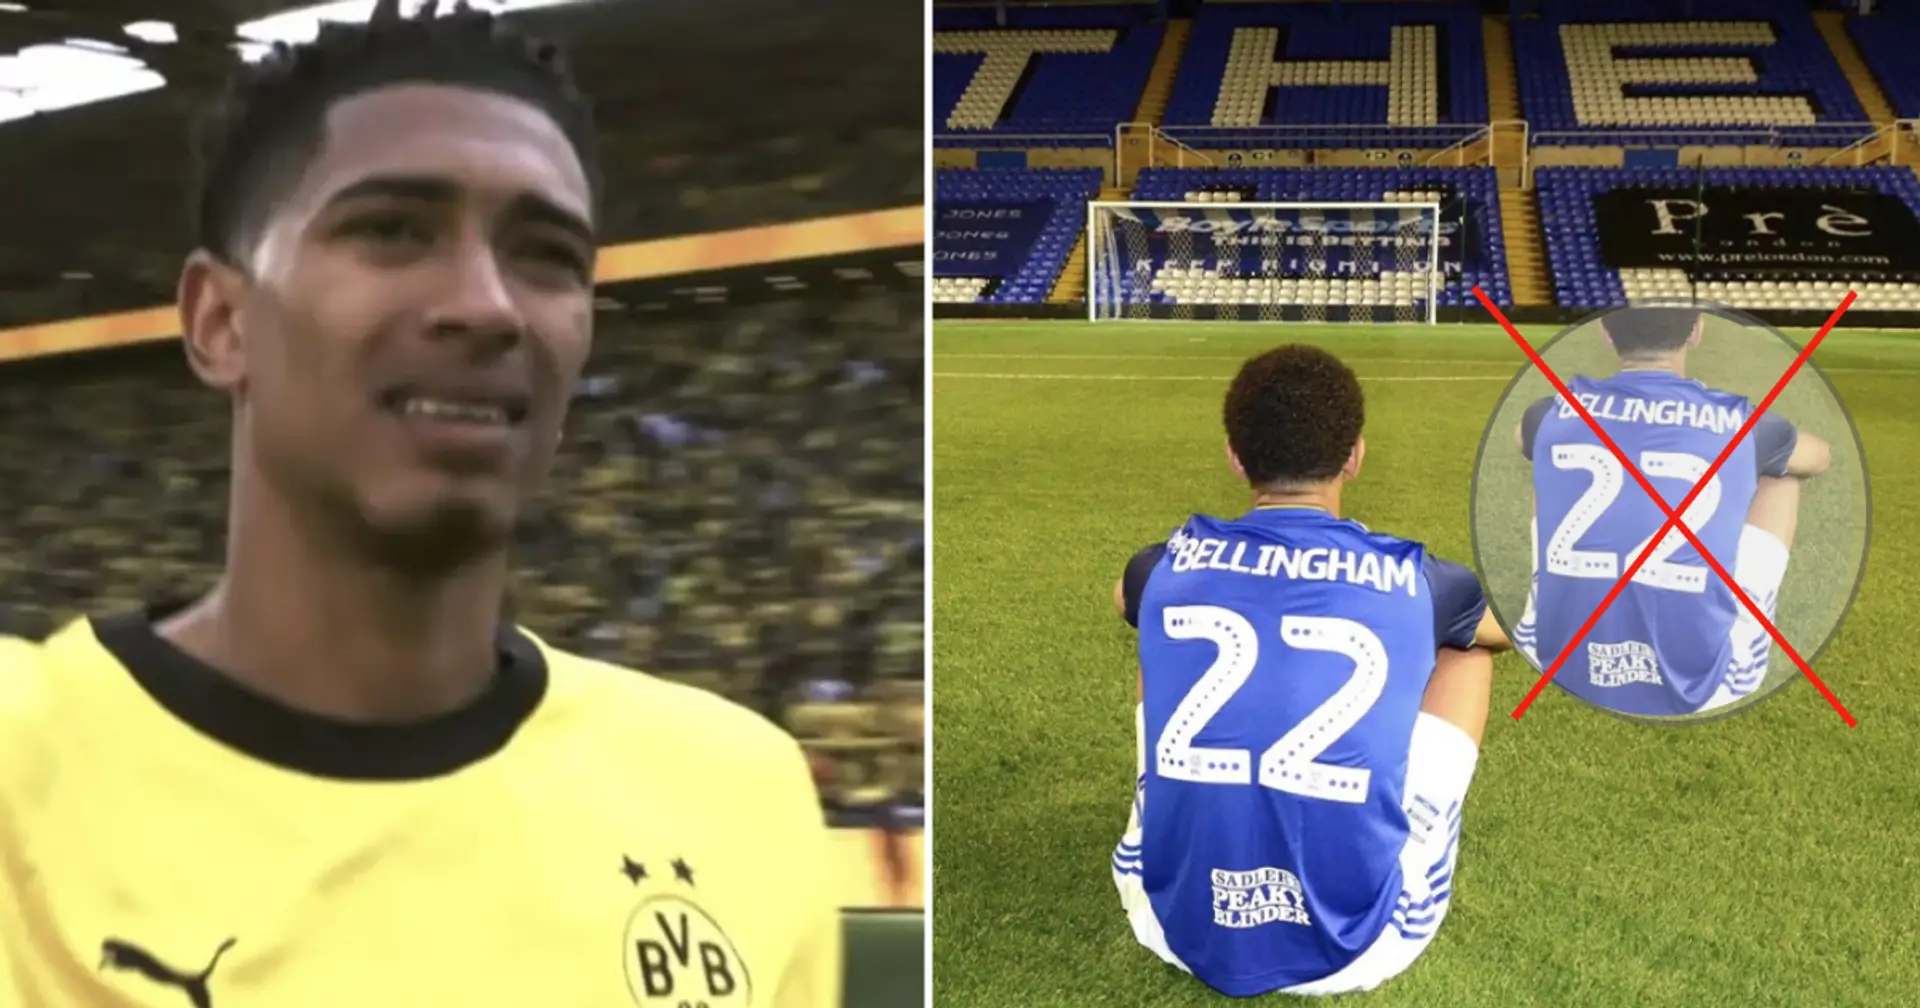 Why Bellingham's no.22 shirt retired by Birmingham City - explained